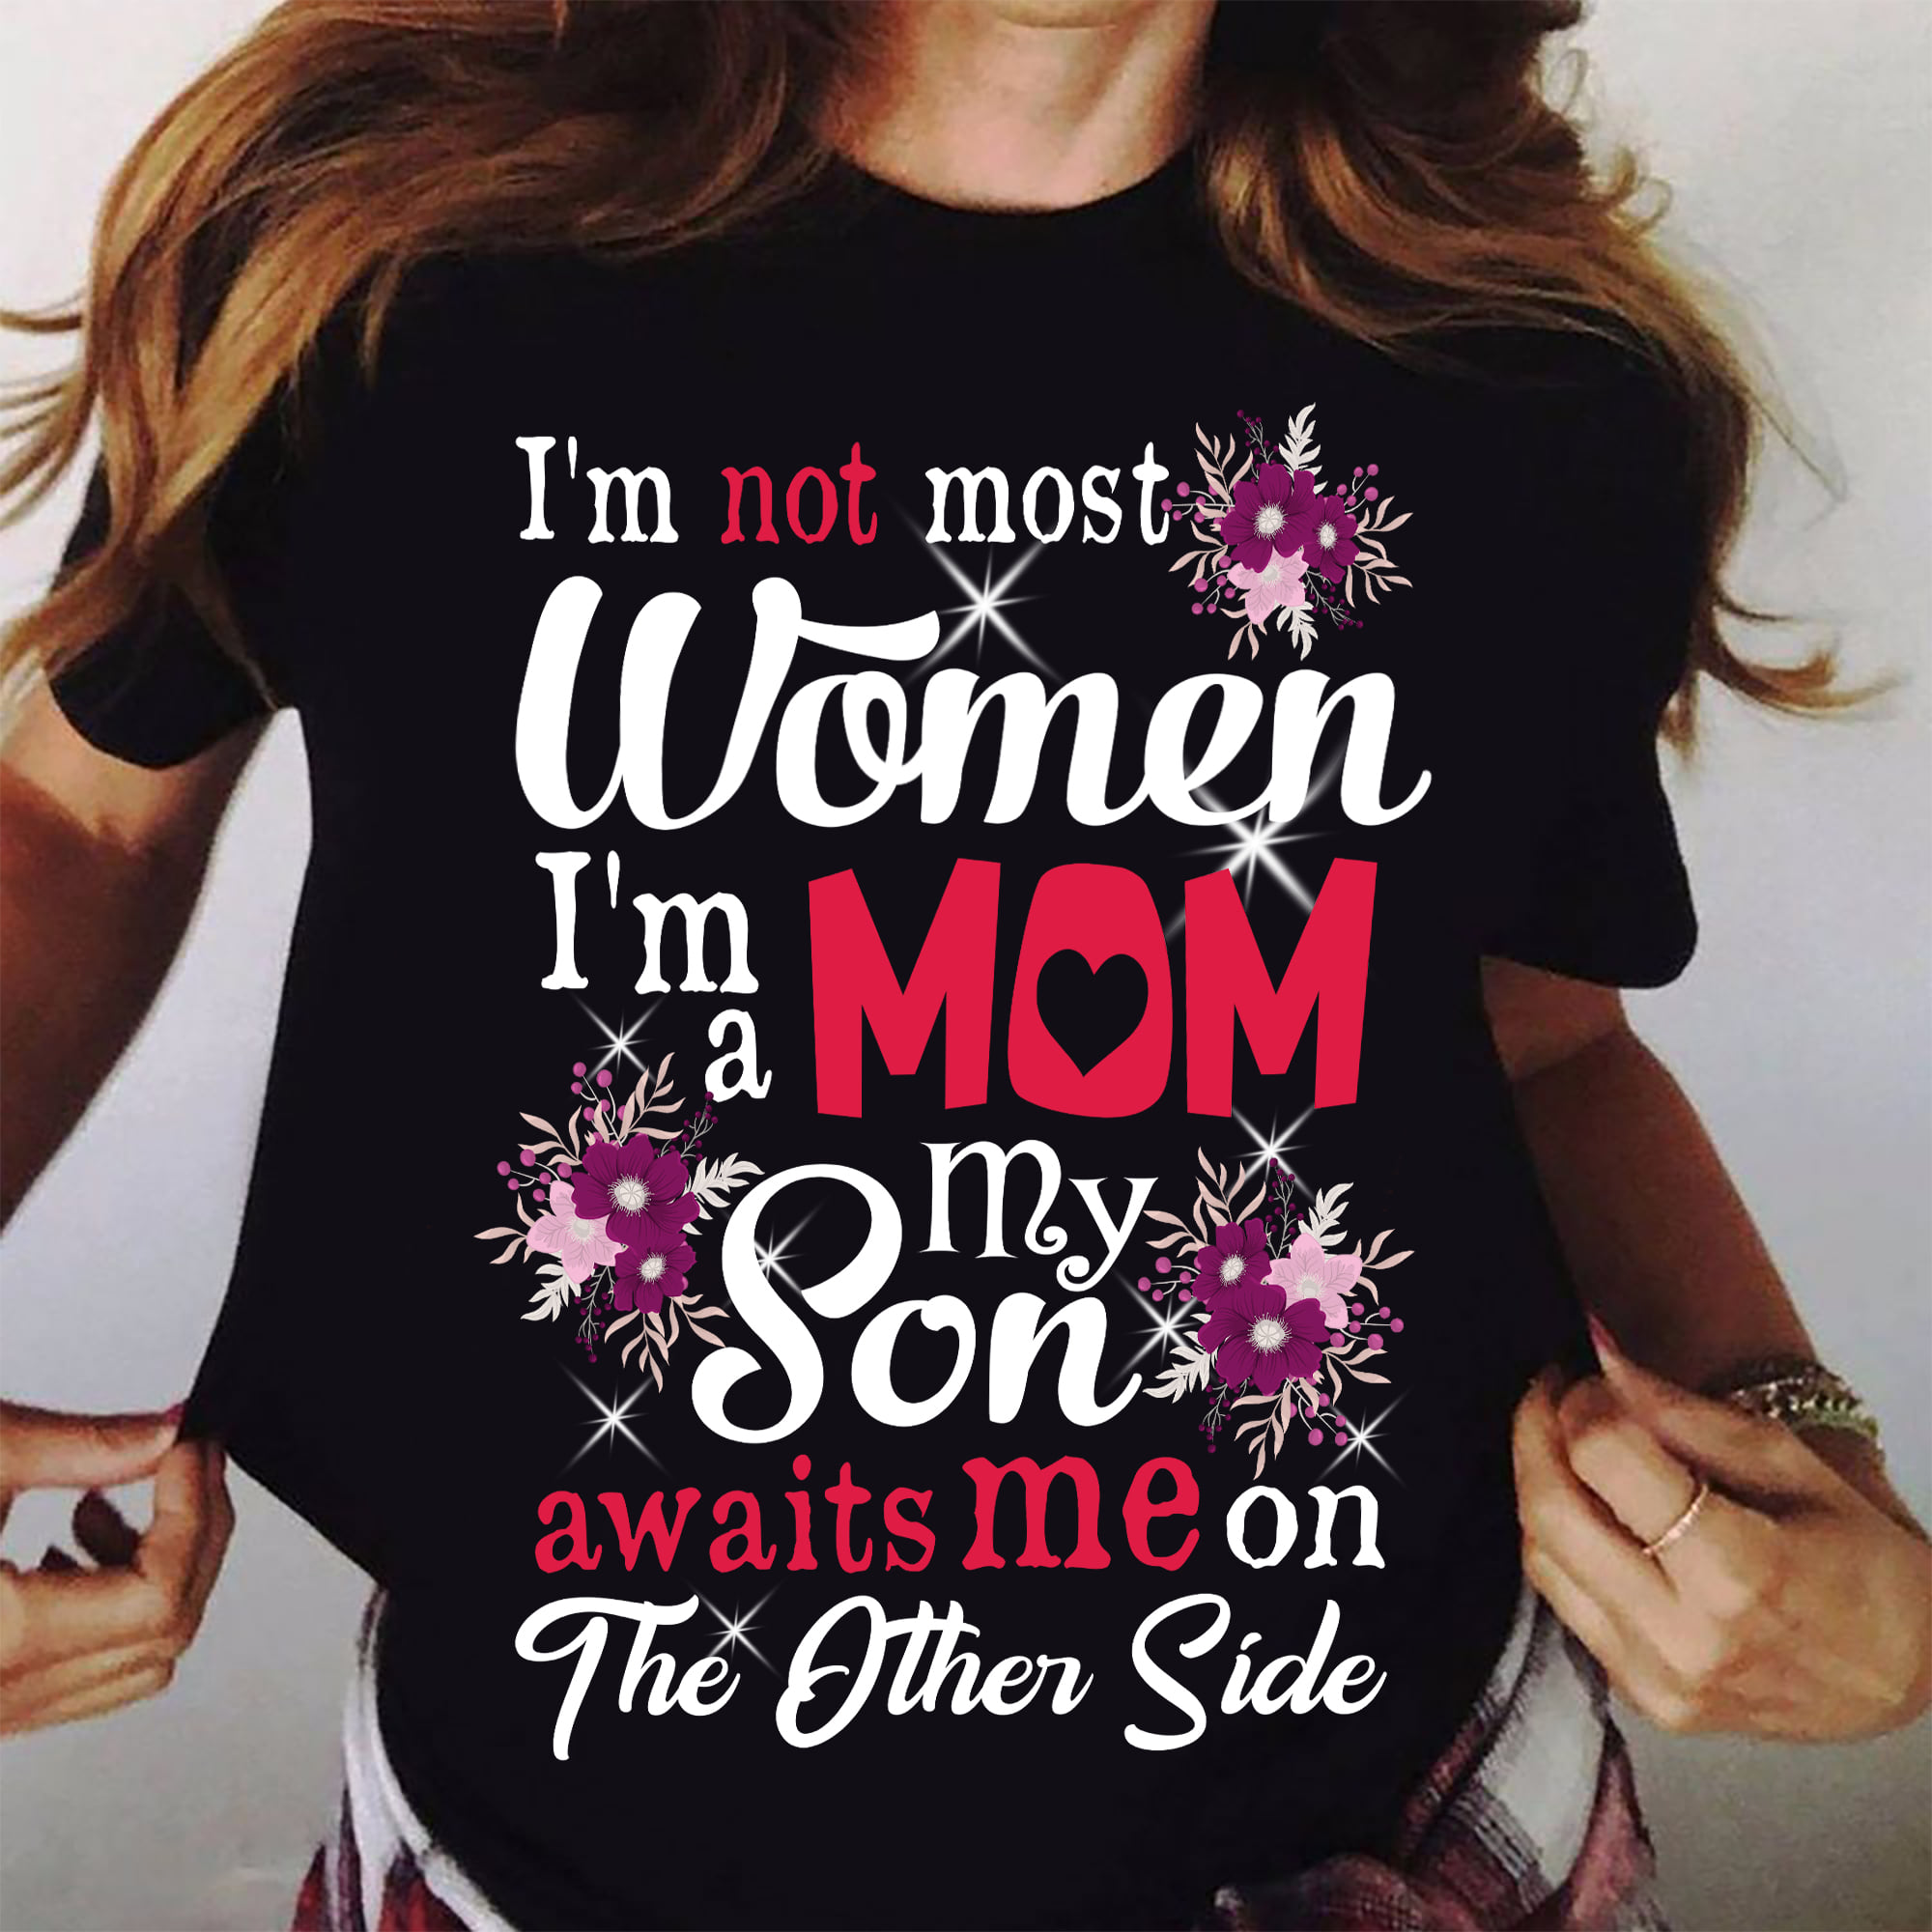 I'm not most women I'm a mom my son awaits me on the other side